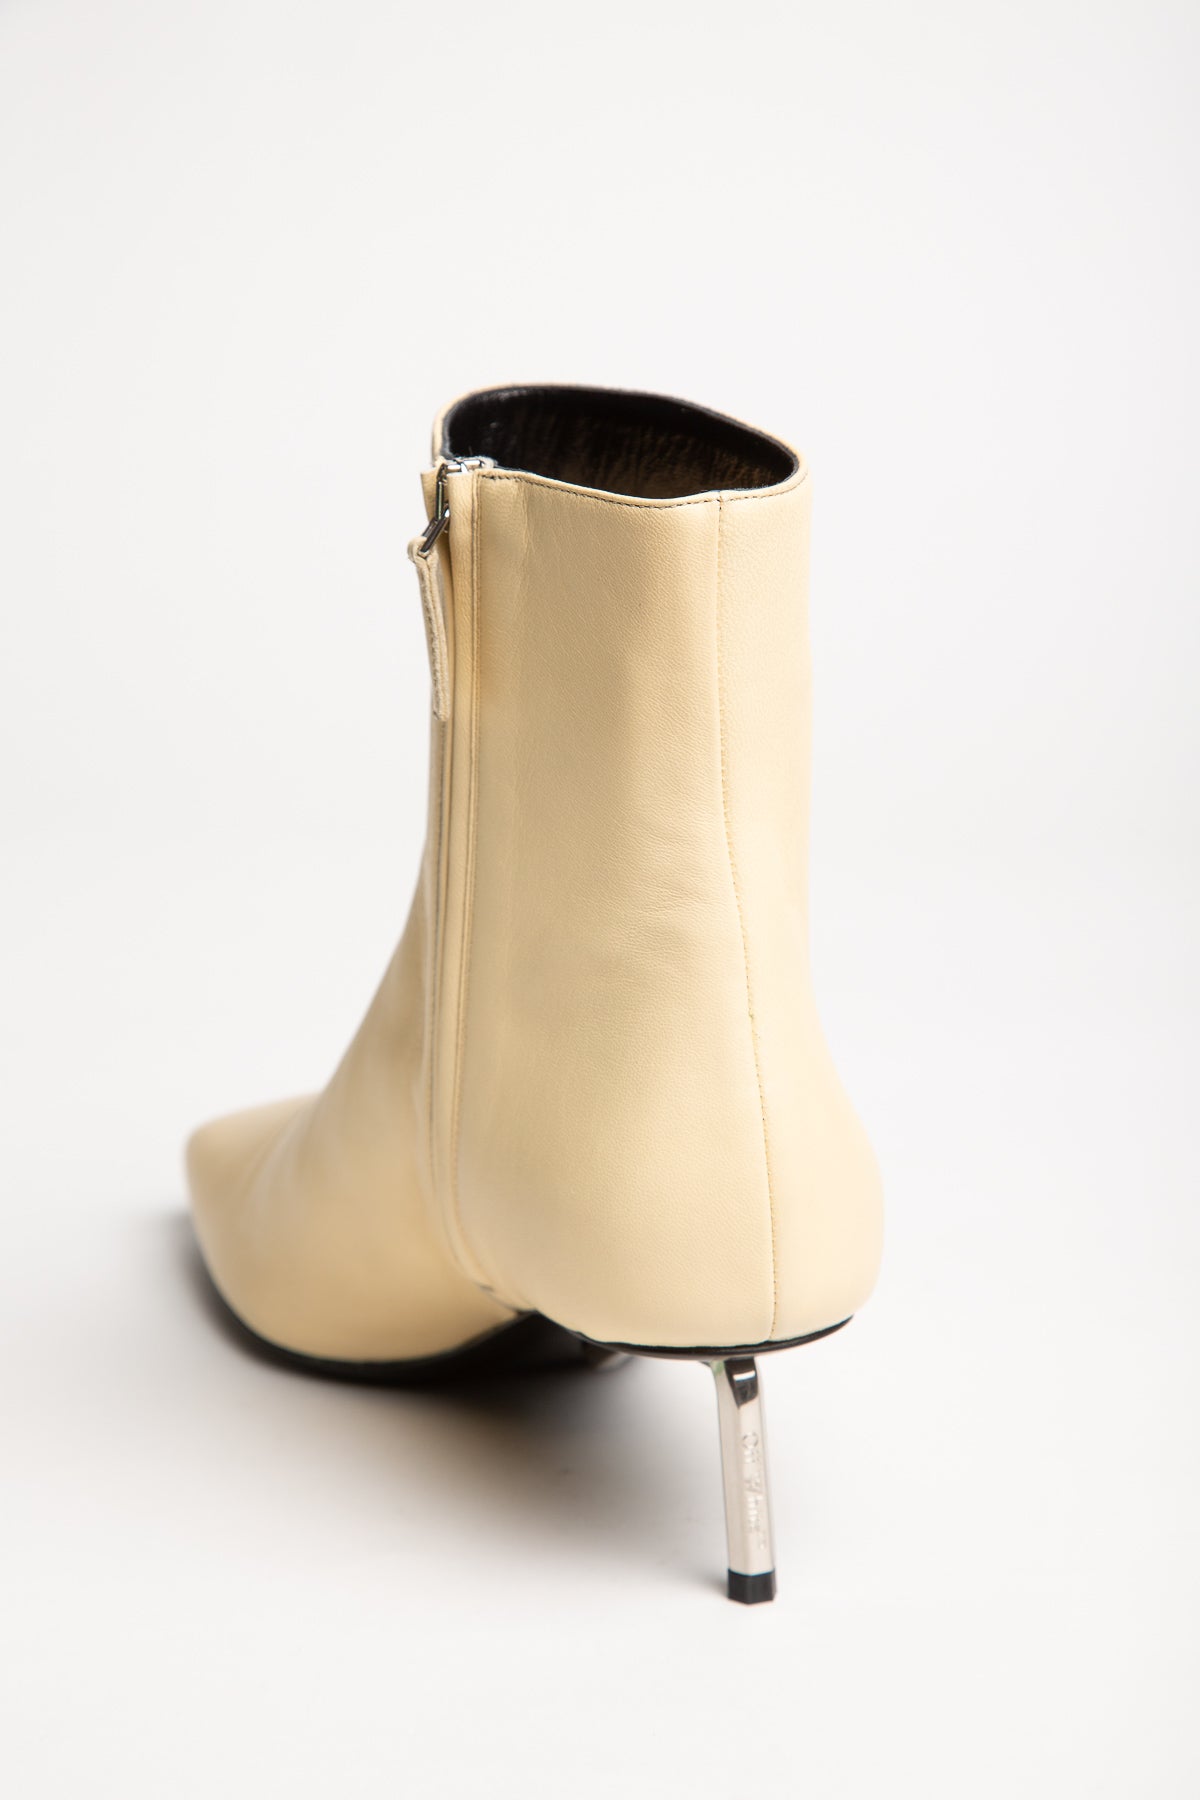 OFF-WHITE | NAPA LEATHER ANKLE BOOTS